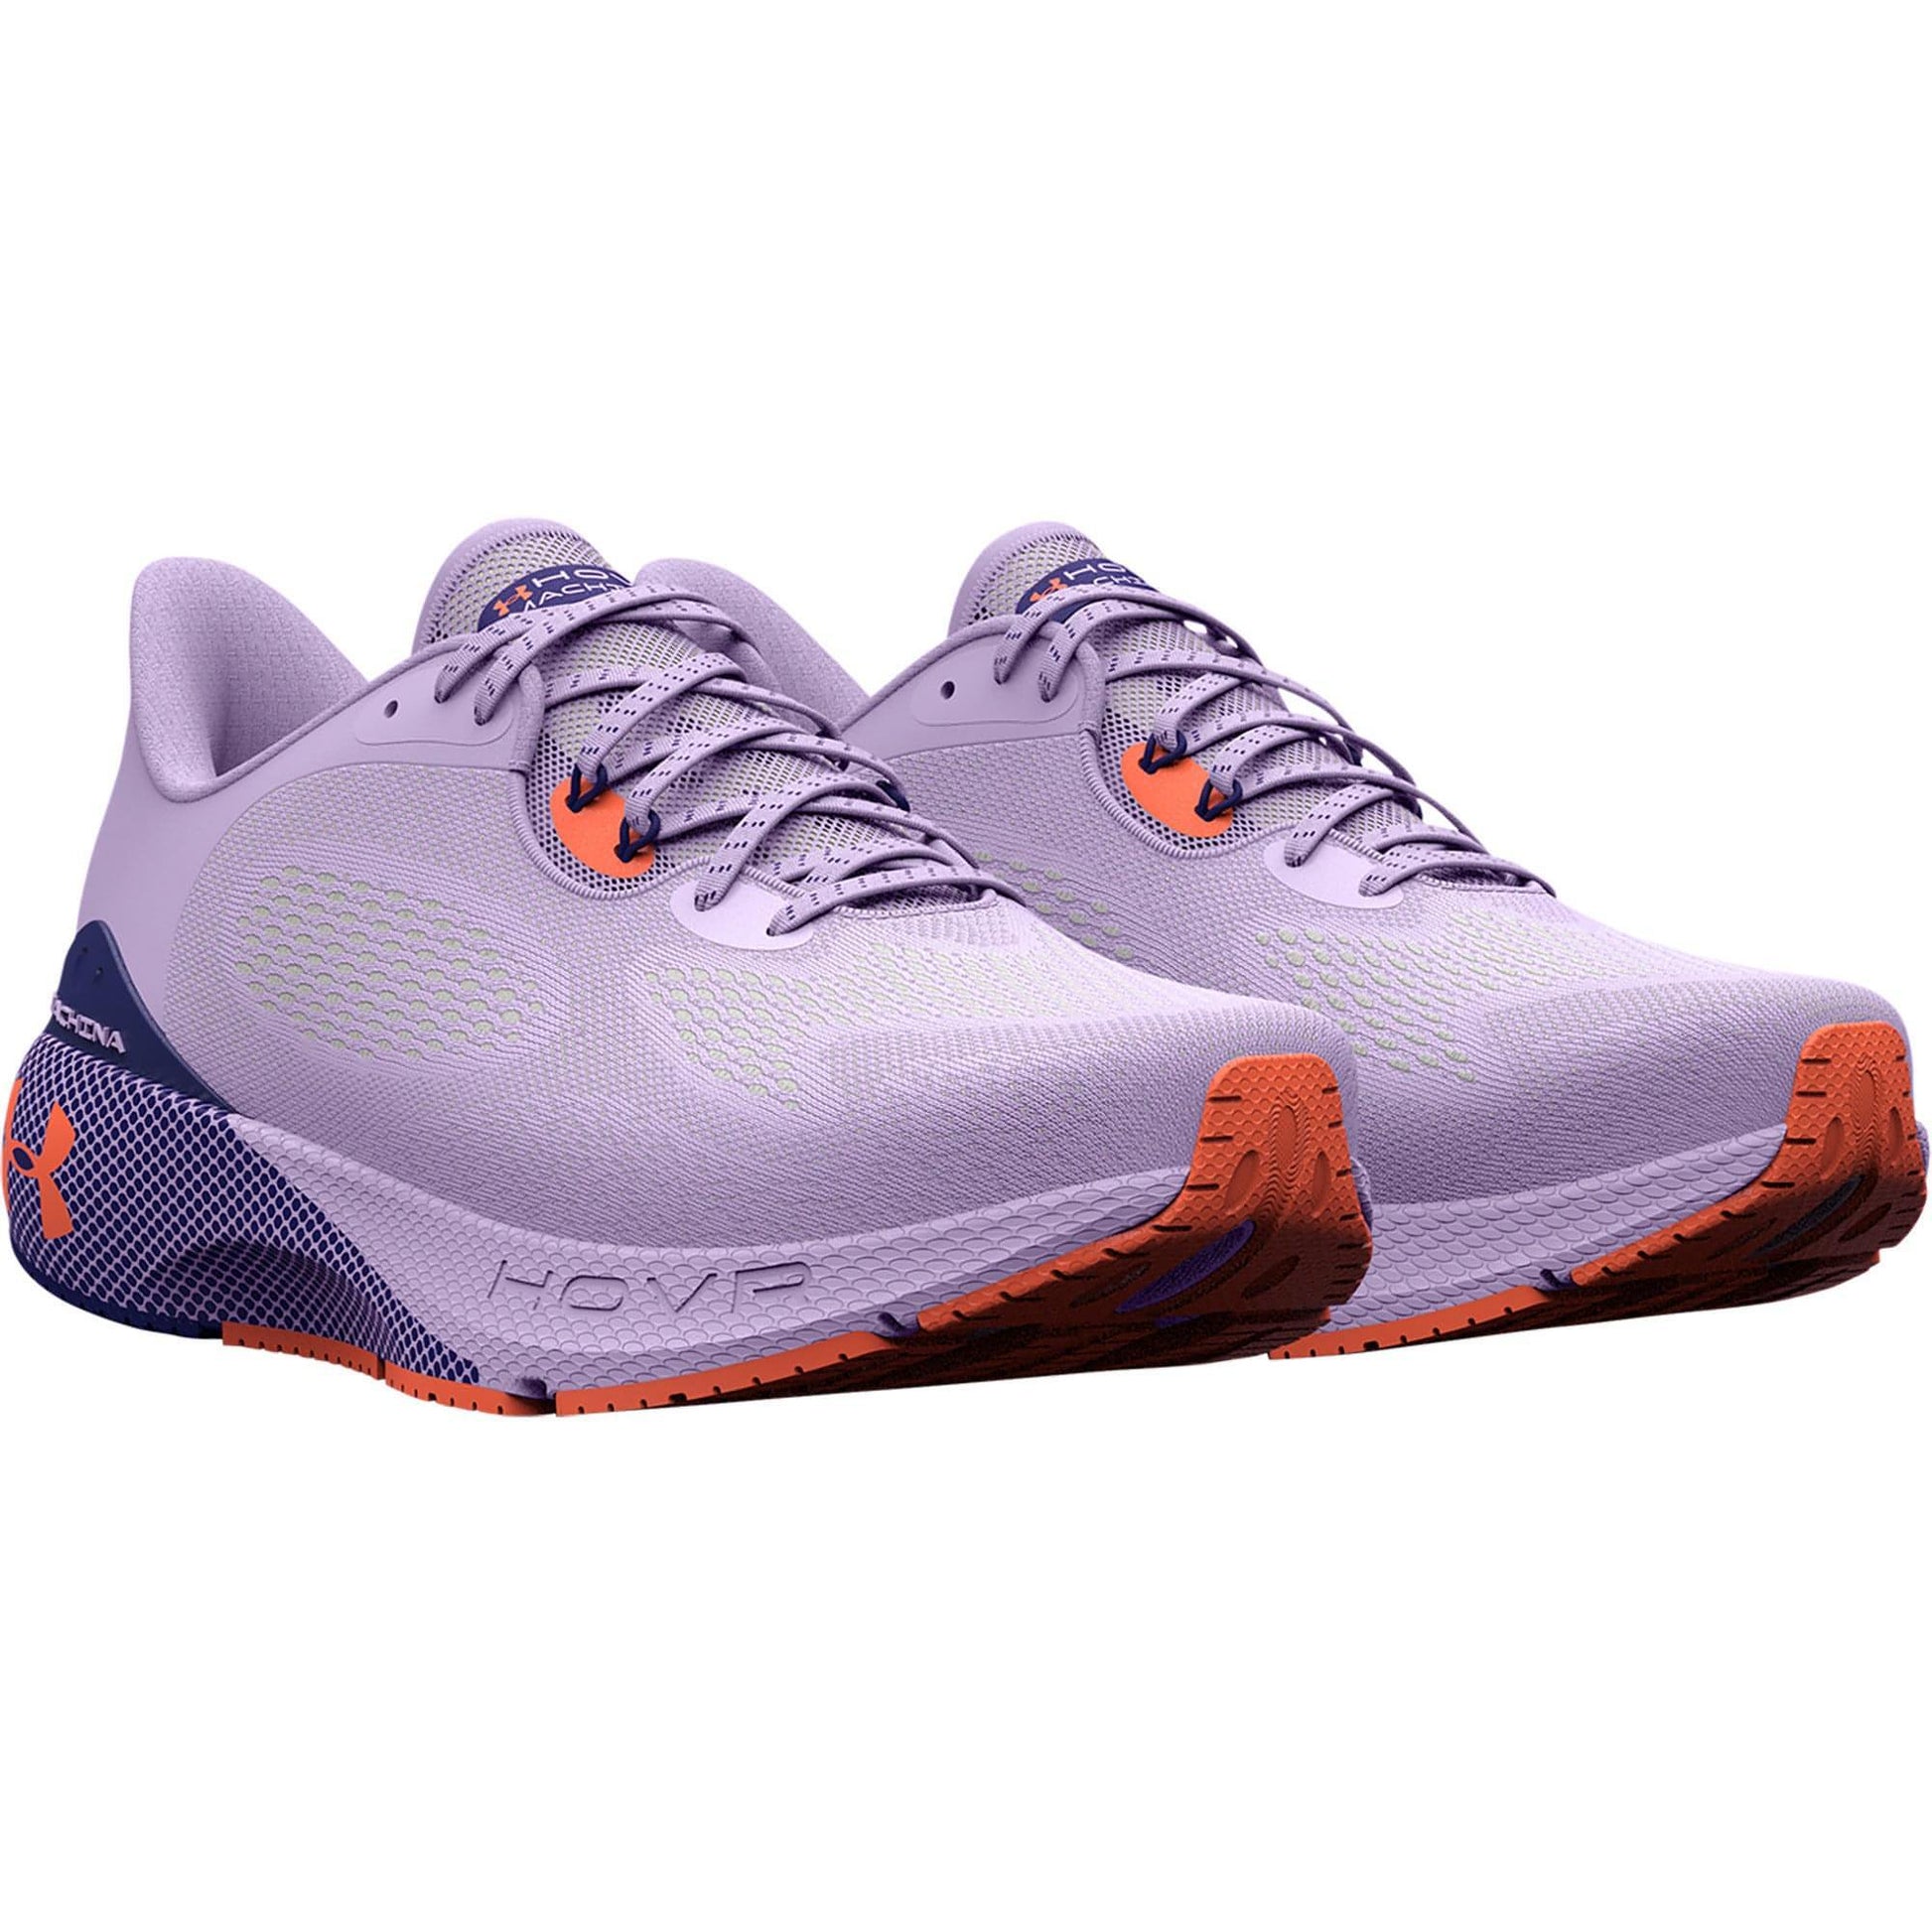 Under Armour HOVR Machina 3 Womens Running Shoes - Purple